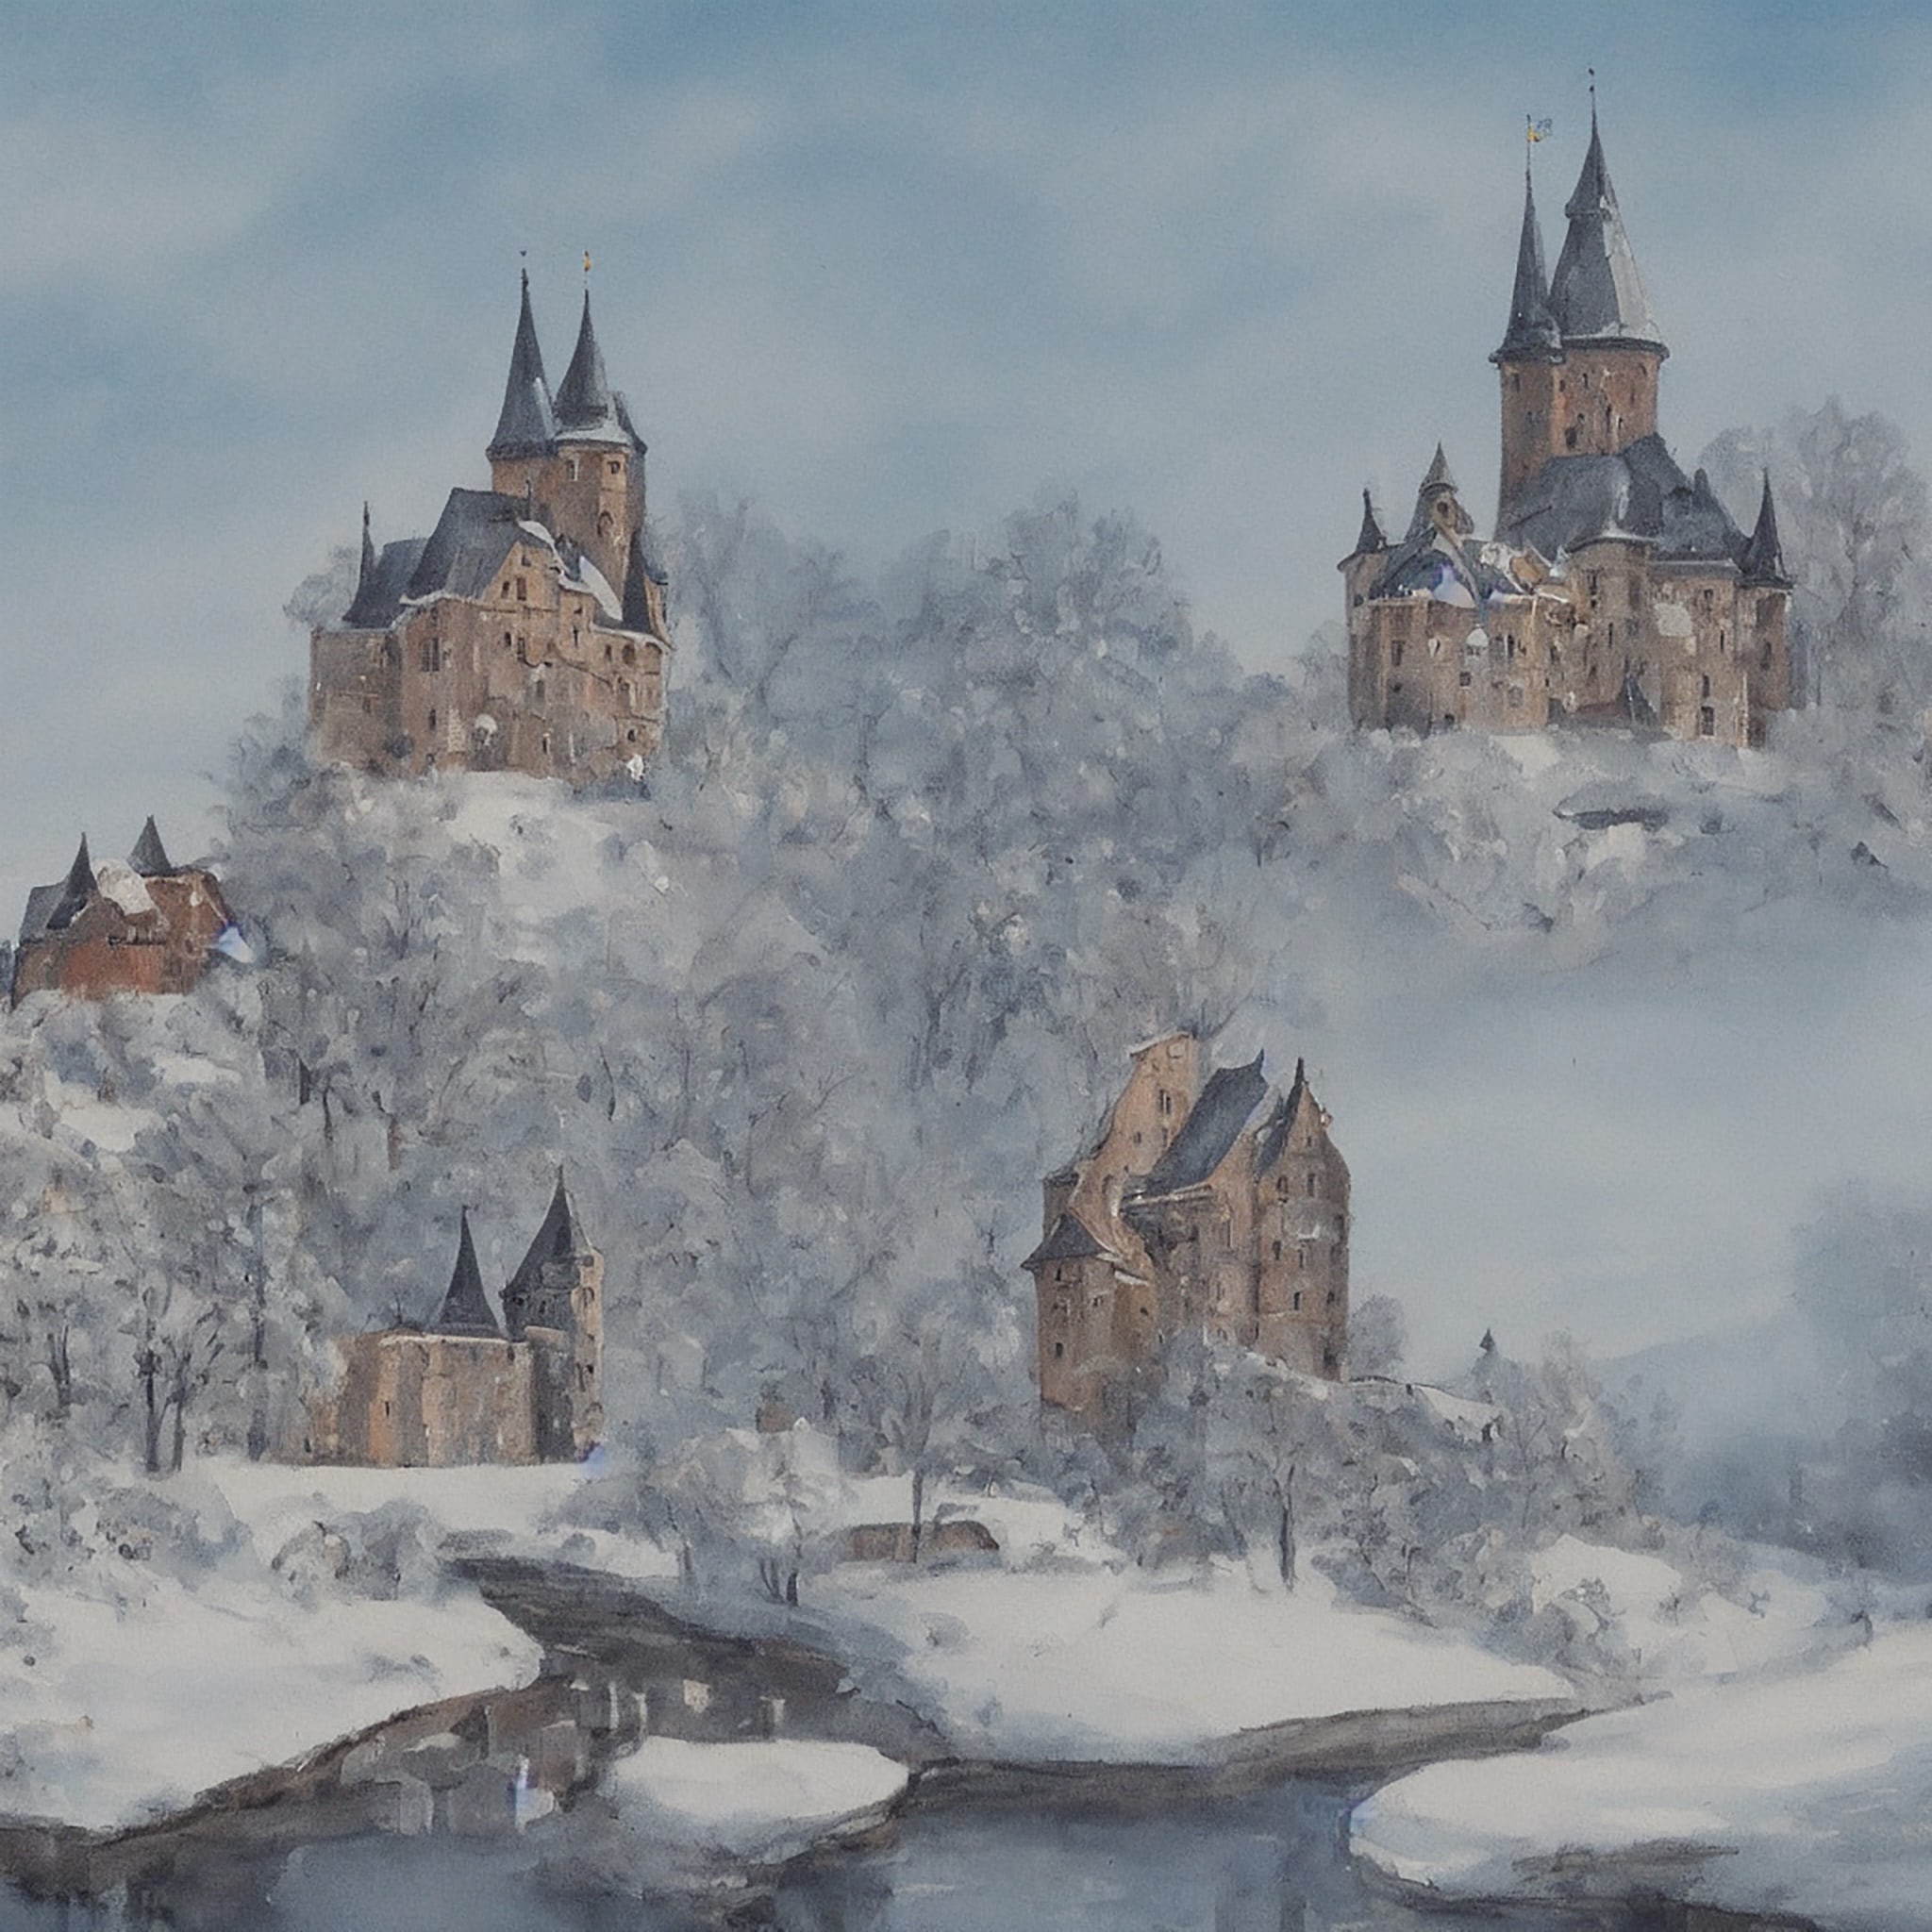 Landscape_painting_of_a_castle_in_Germany_in_the_winter_painted_with_wrong_colors